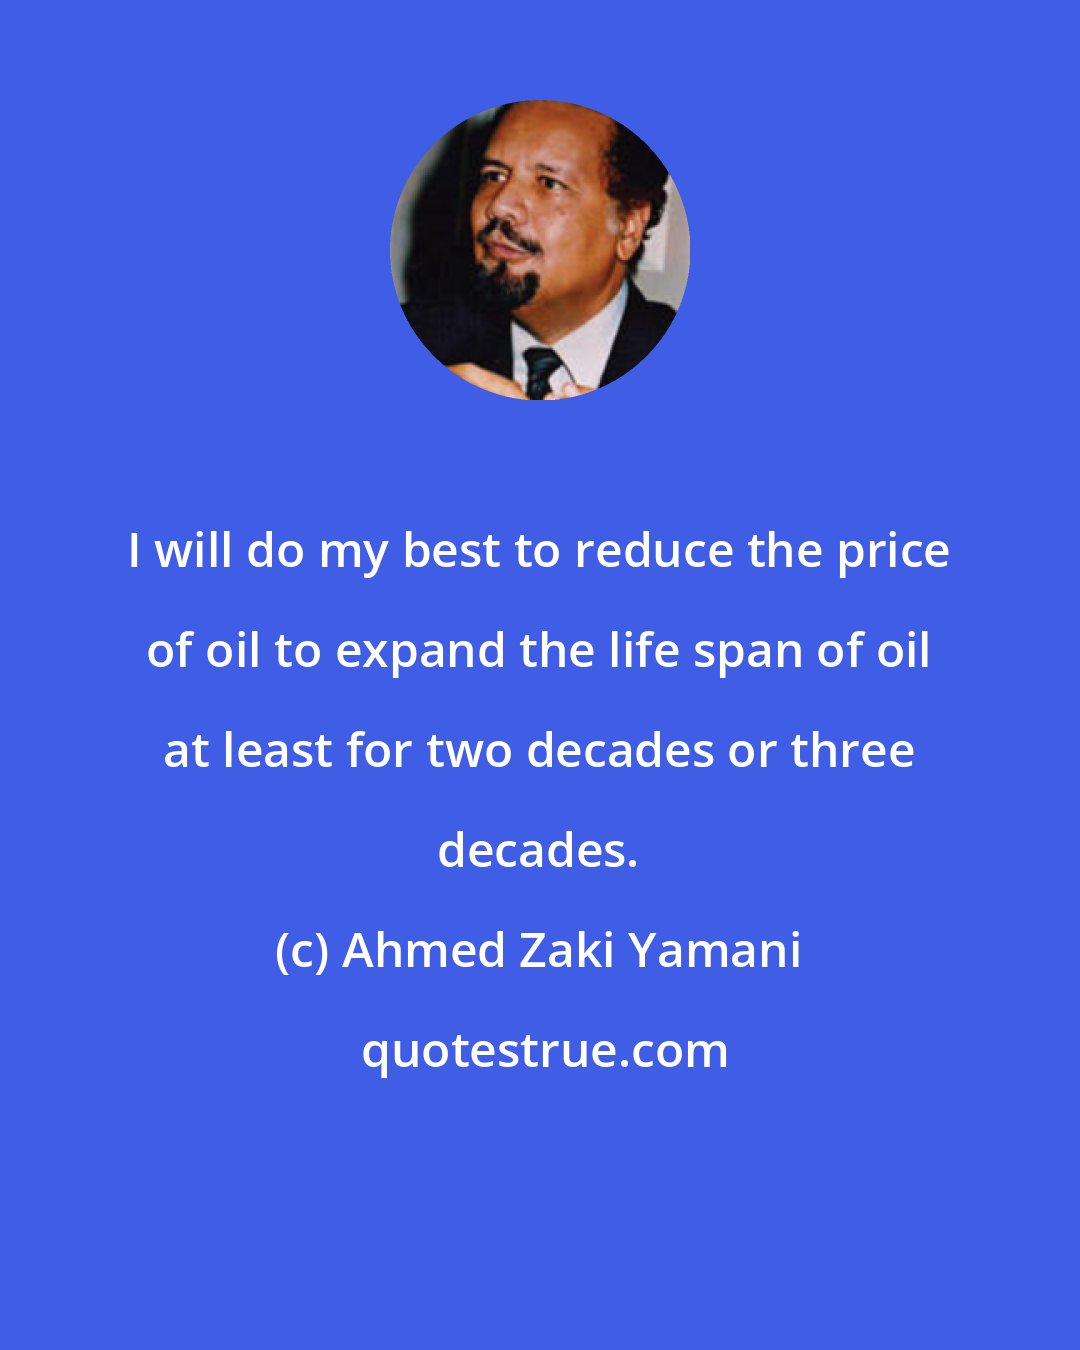 Ahmed Zaki Yamani: I will do my best to reduce the price of oil to expand the life span of oil at least for two decades or three decades.